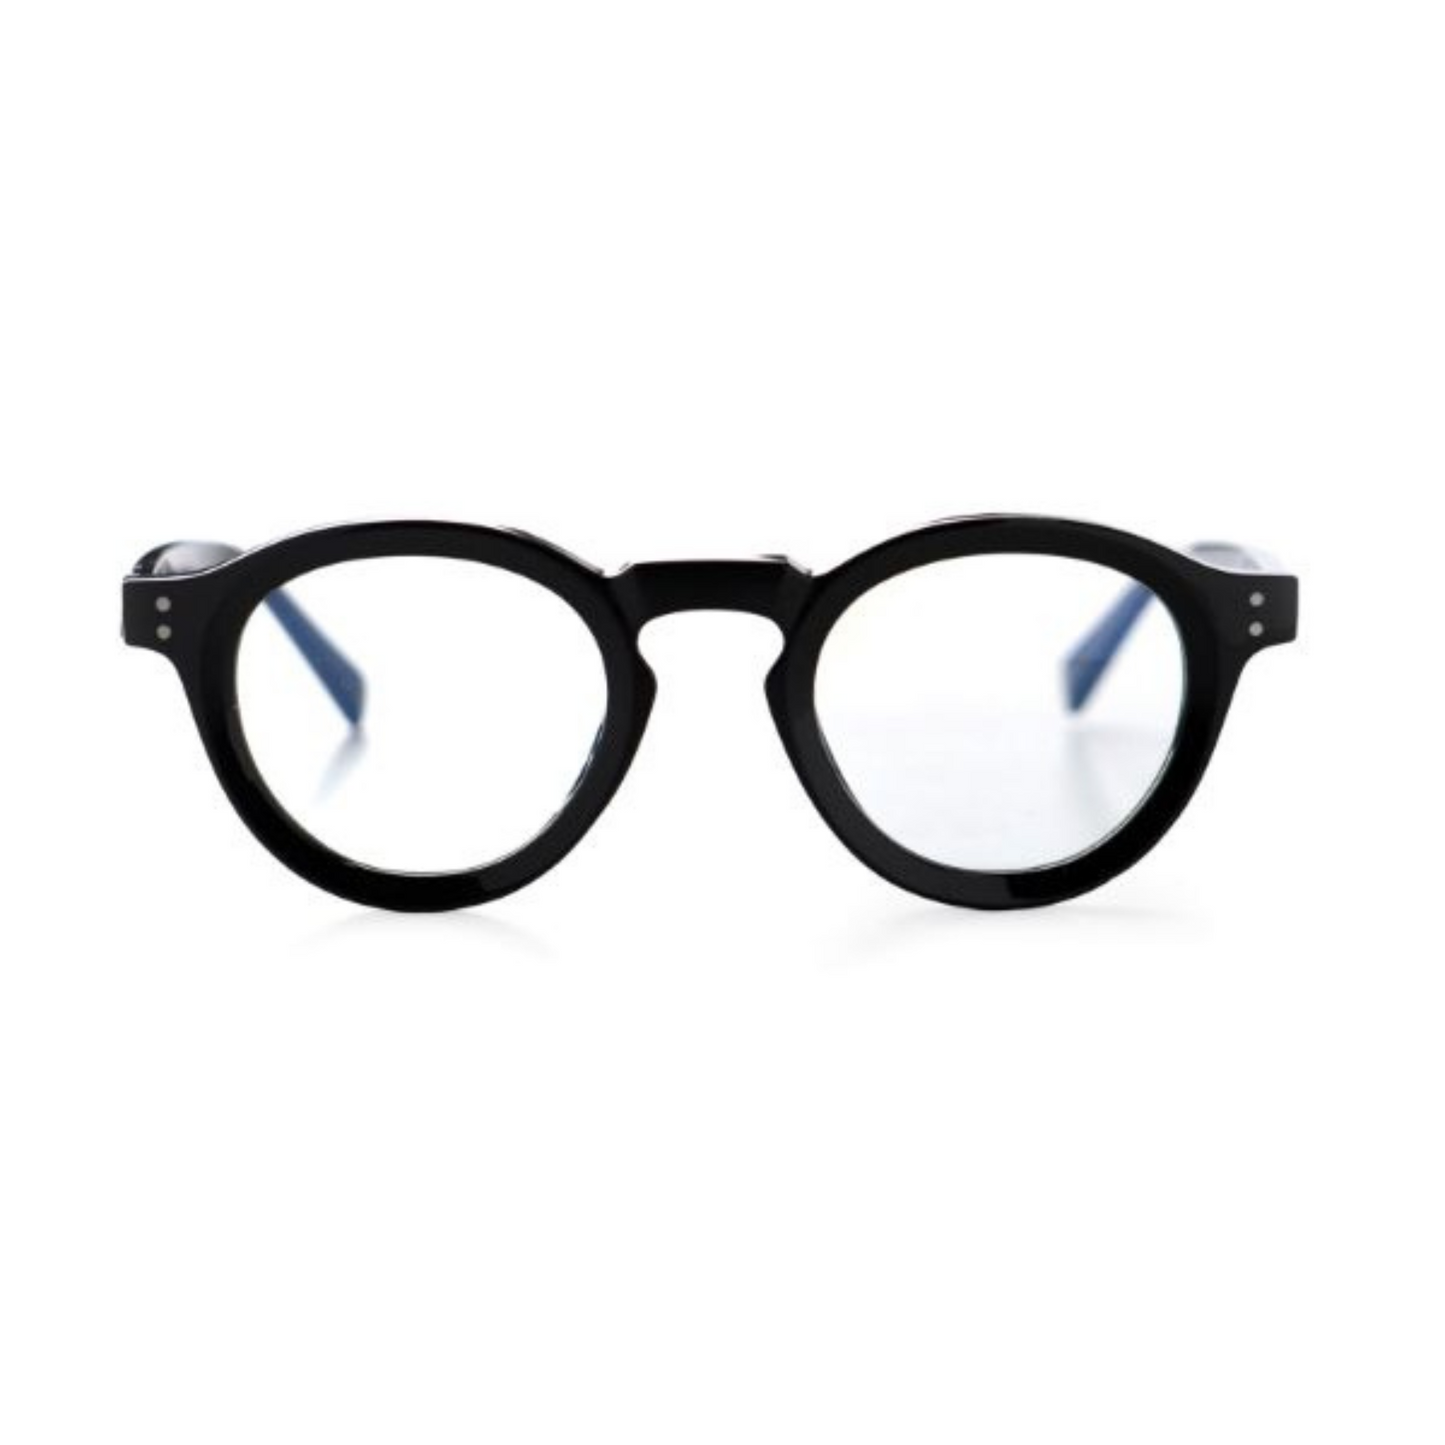 Thick black rimmed reading glasses. This style is called Cooper